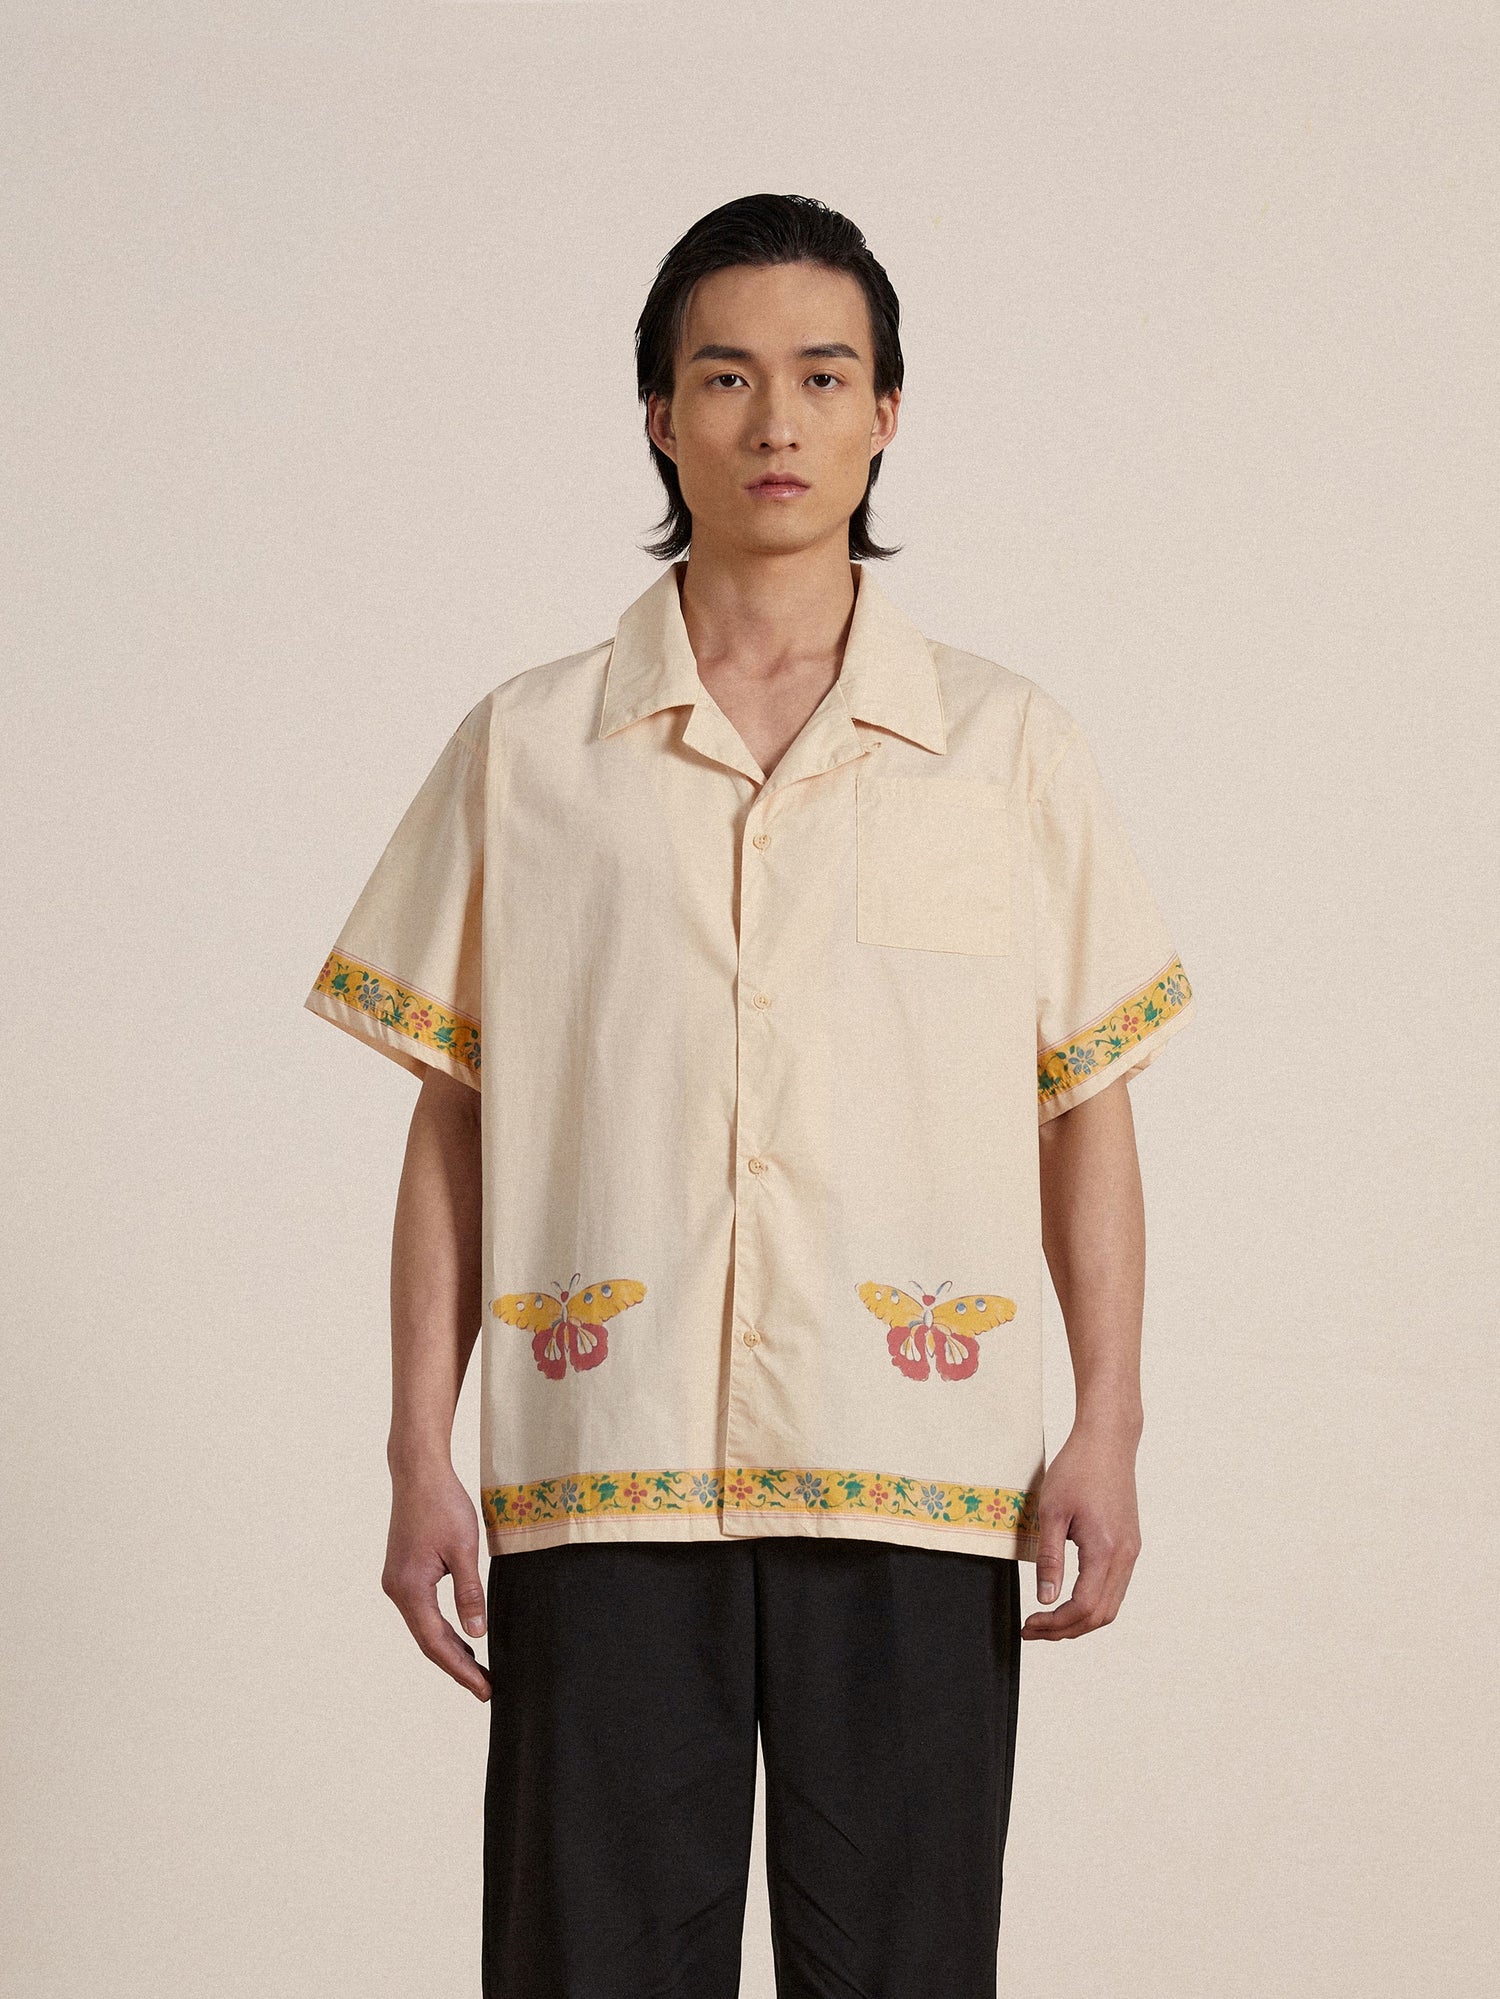 A man wearing a Found Moth Camp Shirt and black nylon pleated pants.